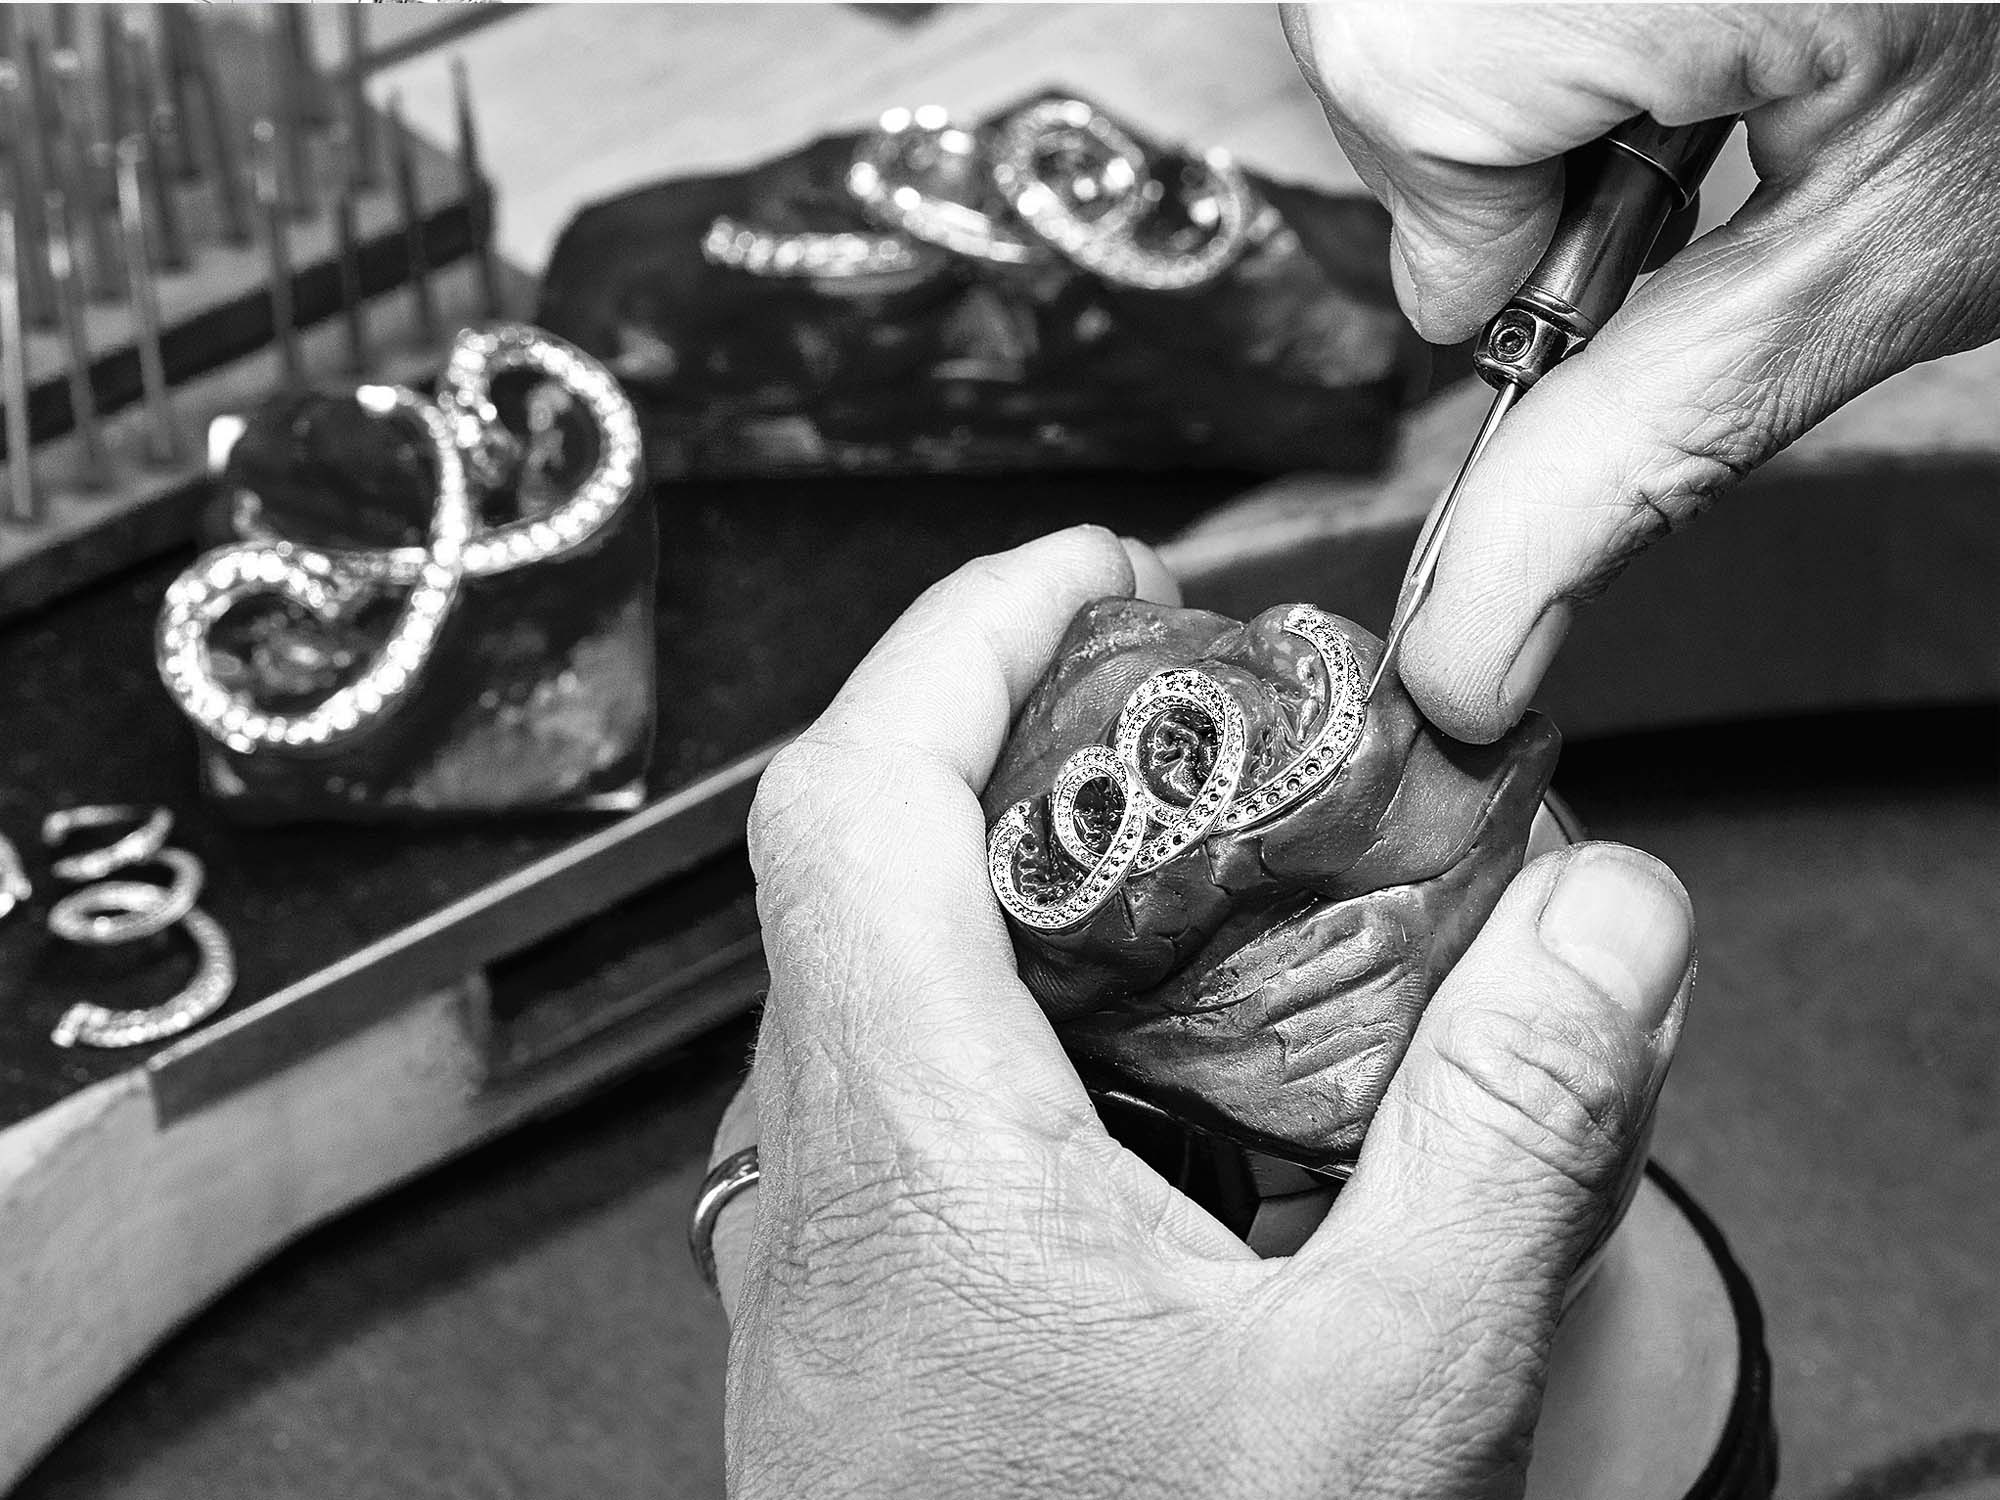 Graff Jeweler crafting Graff Inspired by Twombly diamond jewellery collection.